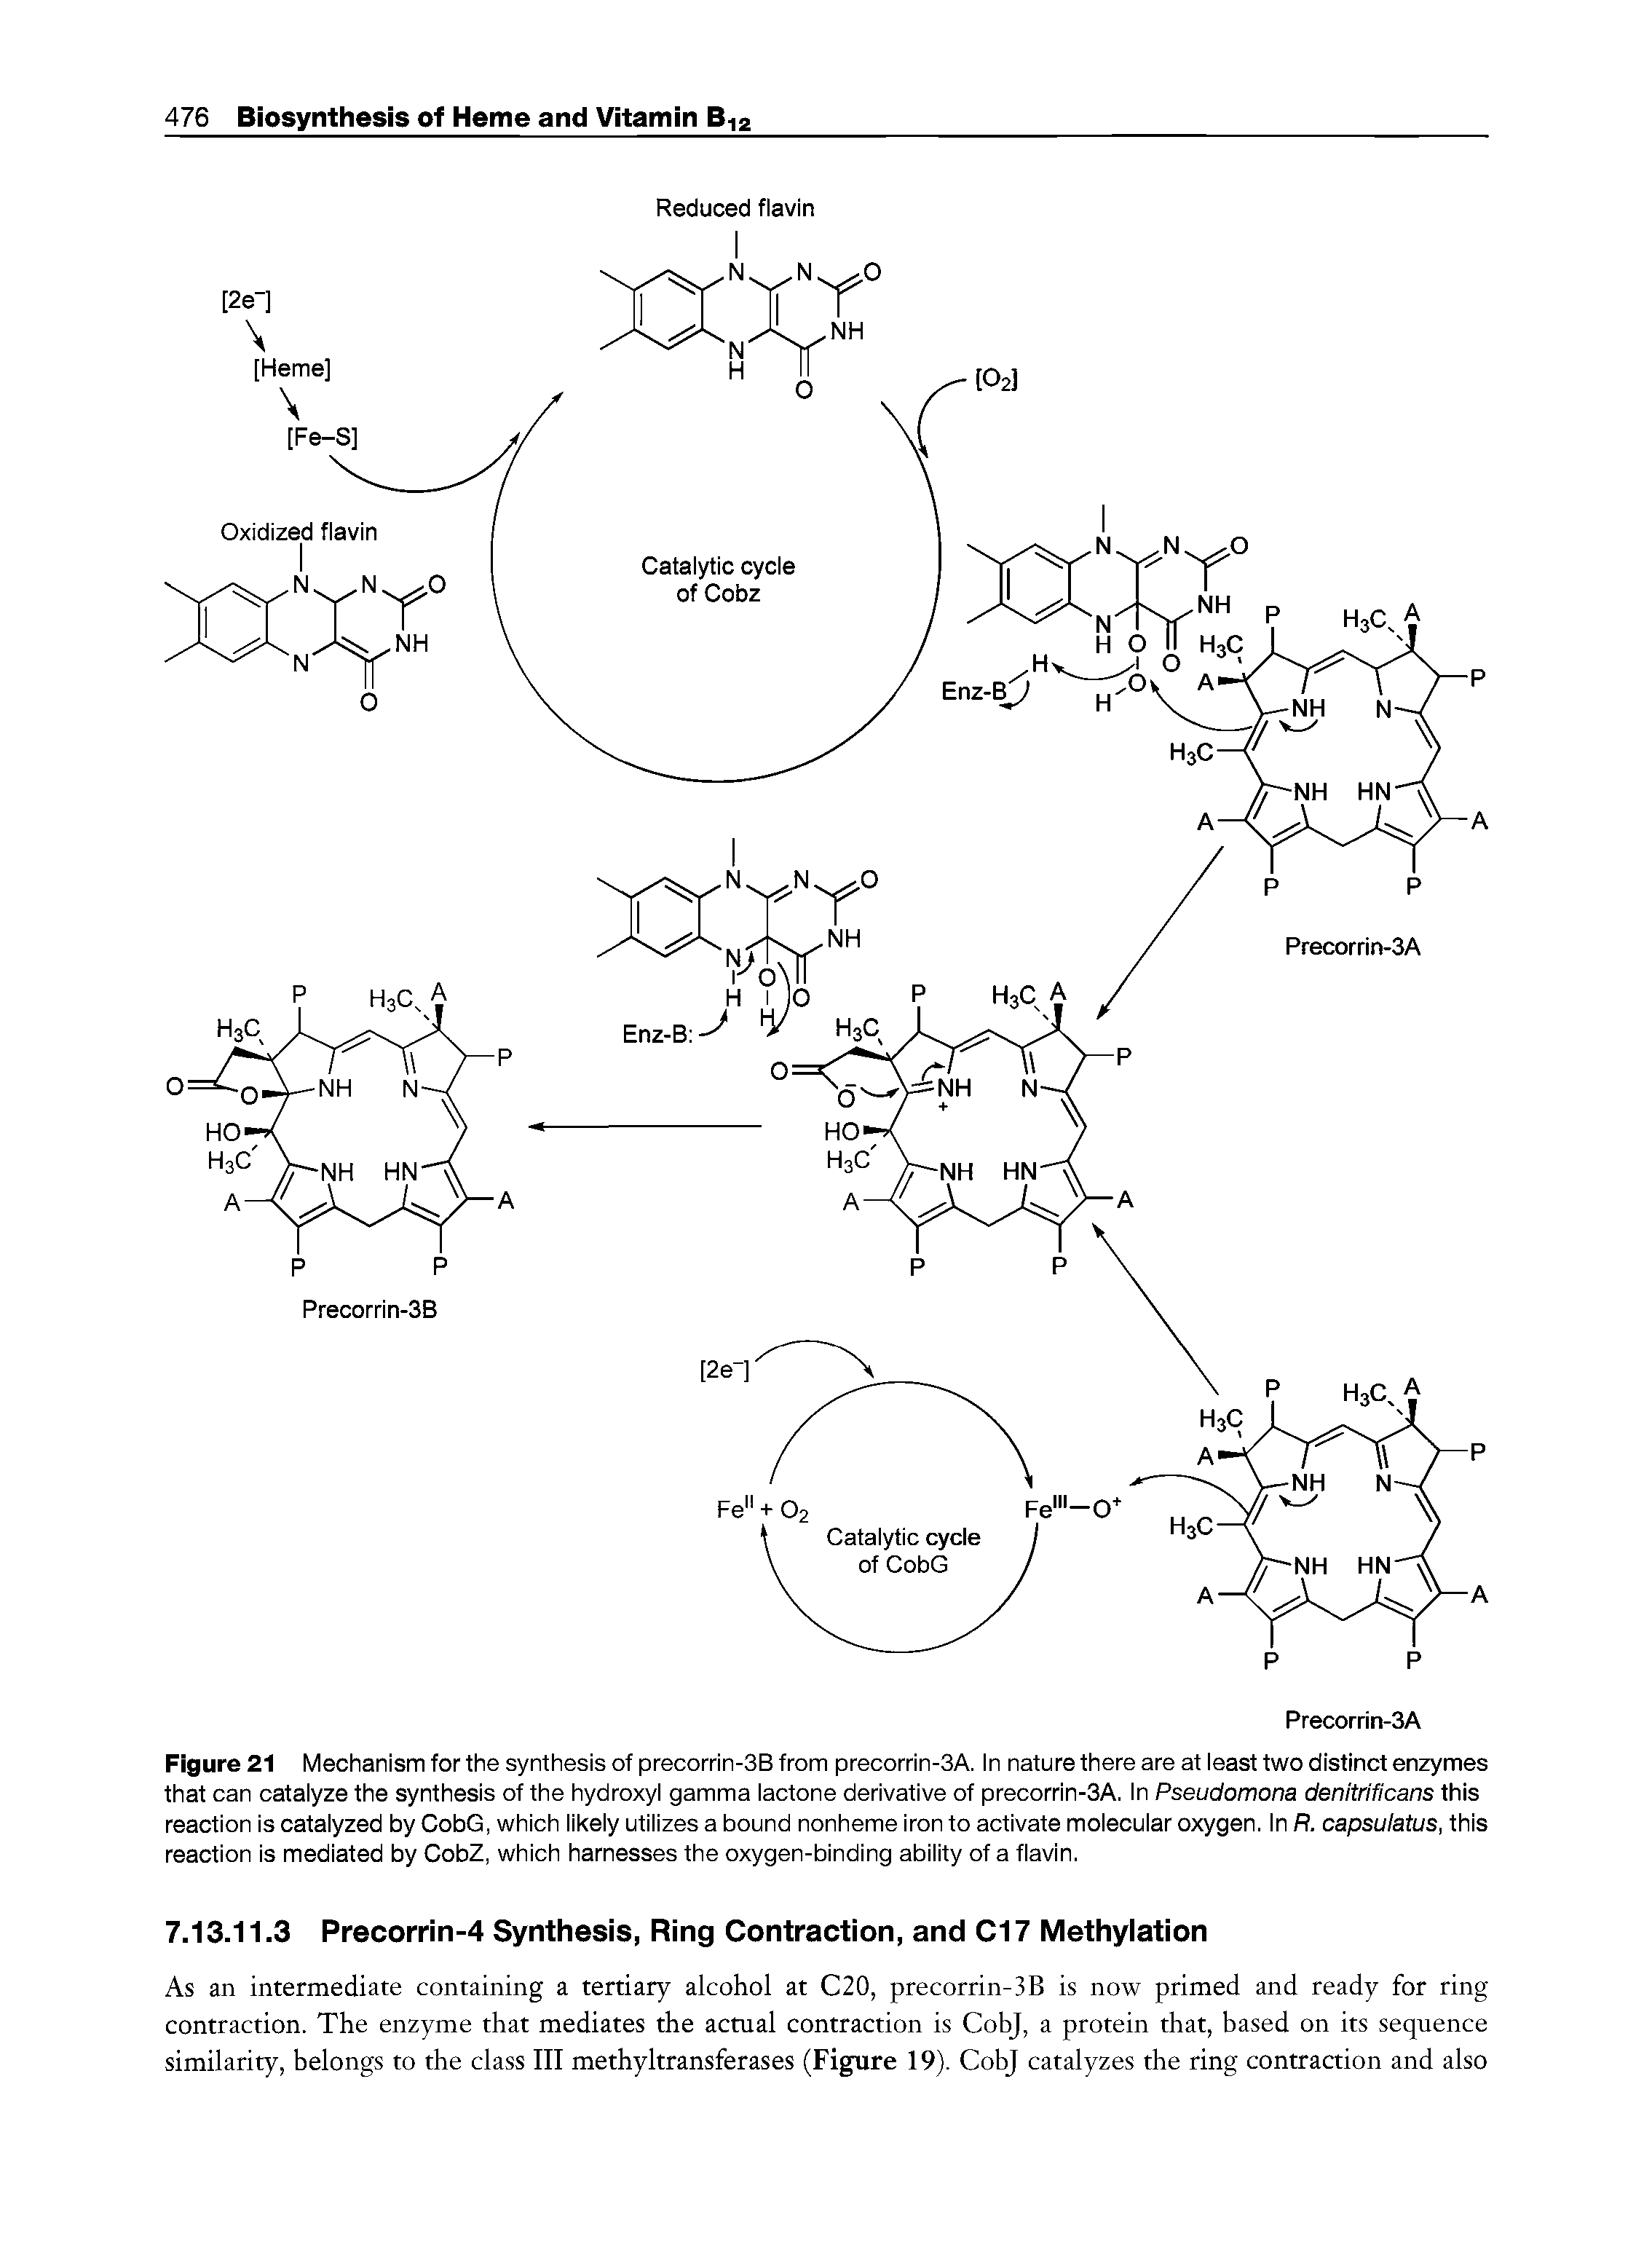 Figure 21 Mechanism for the synthesis of precorrin-3B from precorrin-3A. In nature there are at least two distinct enzymes that can catalyze the synthesis of the hydroxyl gamma lactone derivative of precorrin-3A. In Pseudomona denitrificans this reaction is catalyzed by CobG, which likely utilizes a bound nonheme iron to activate molecular oxygen. In R. capsulatus, this reaction is mediated by CobZ, which harnesses the oxygen-binding ability of a flavin.